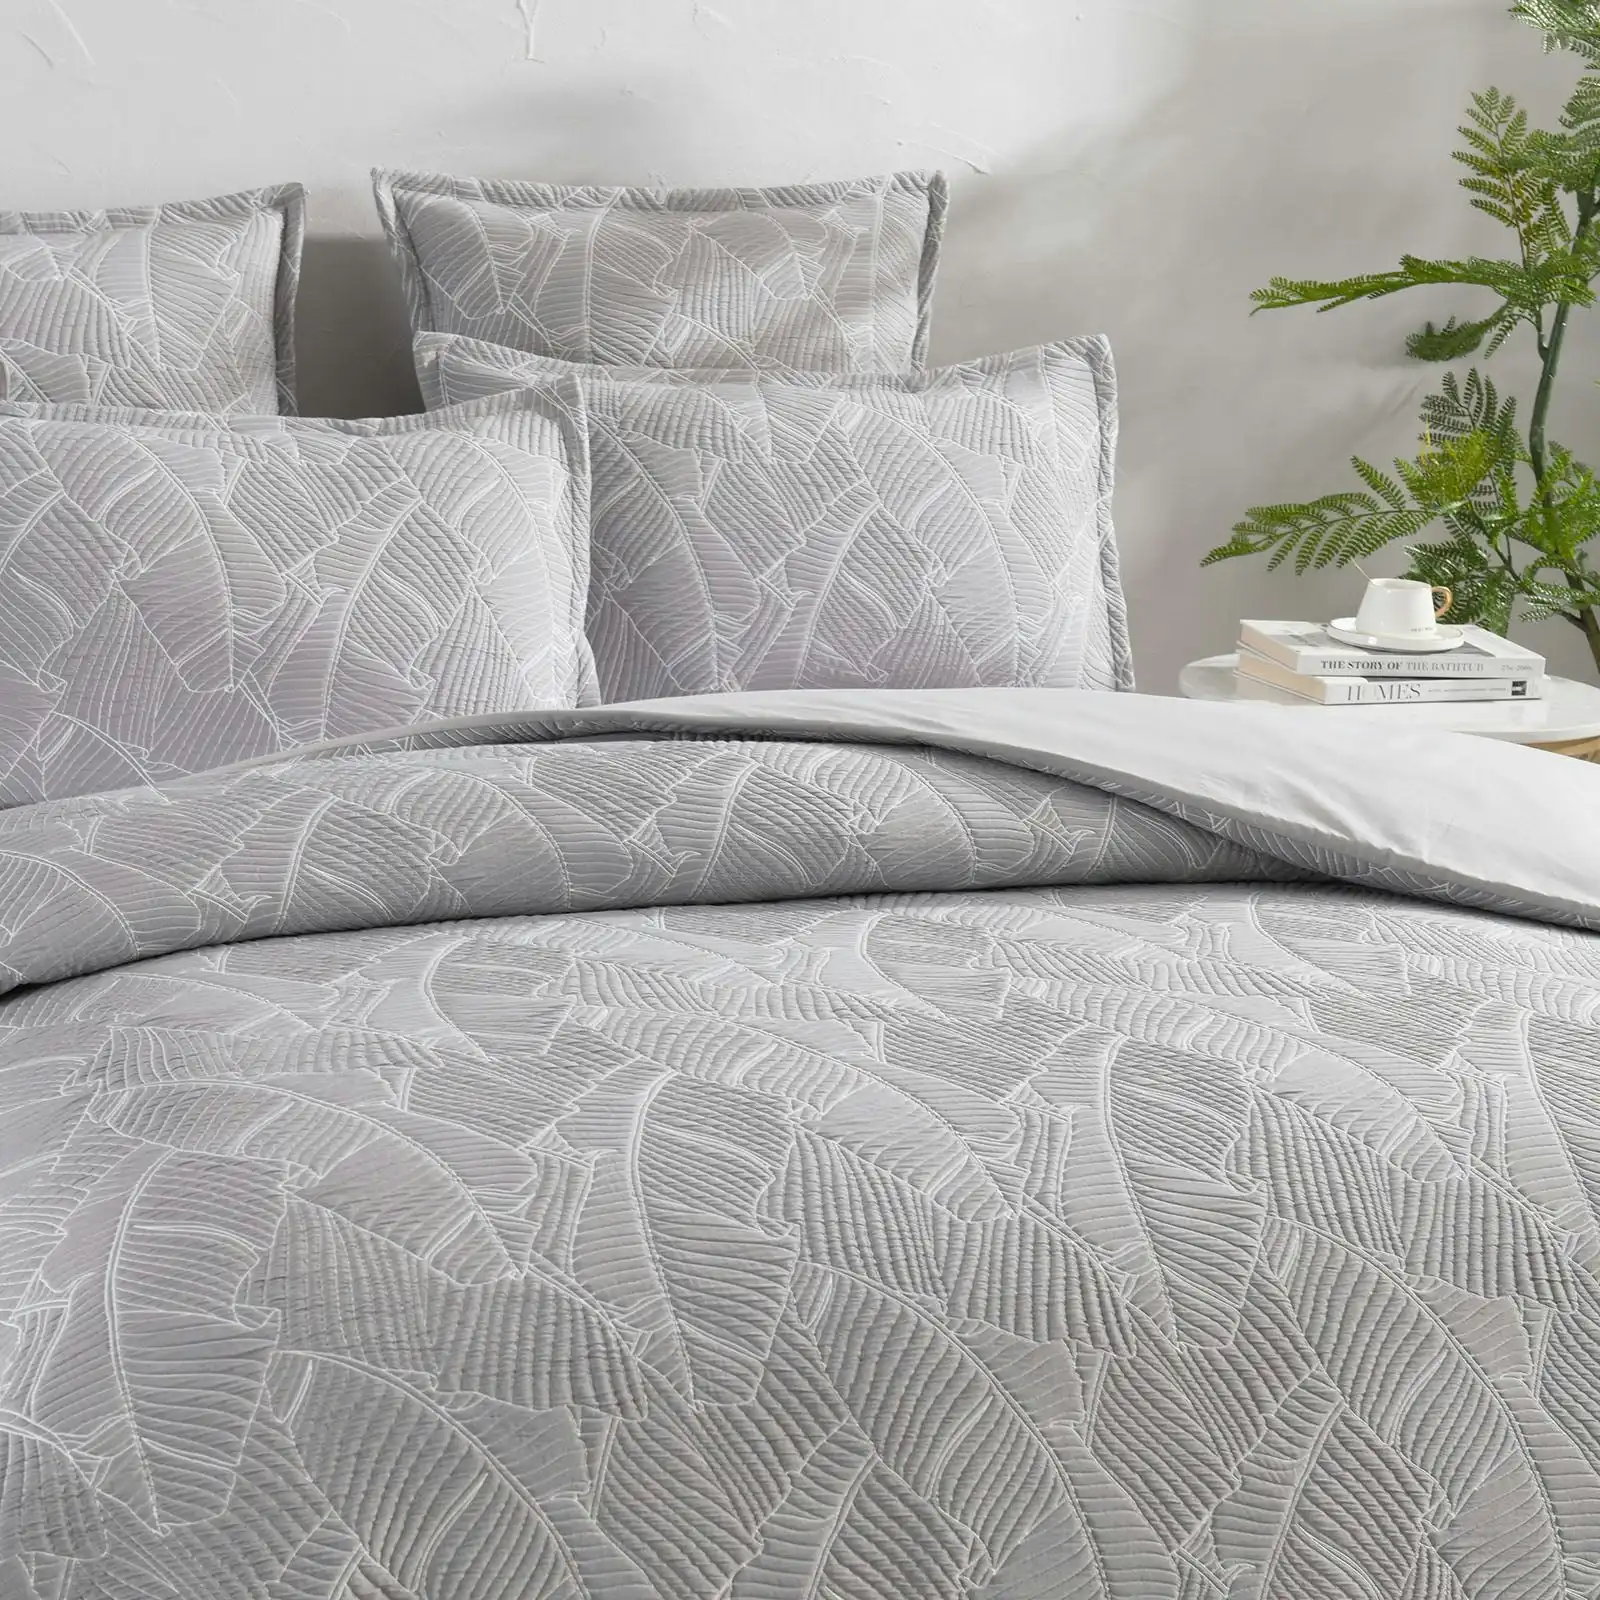 Bengali Silver Jacquard Quilt cover Set by Renee Taylor